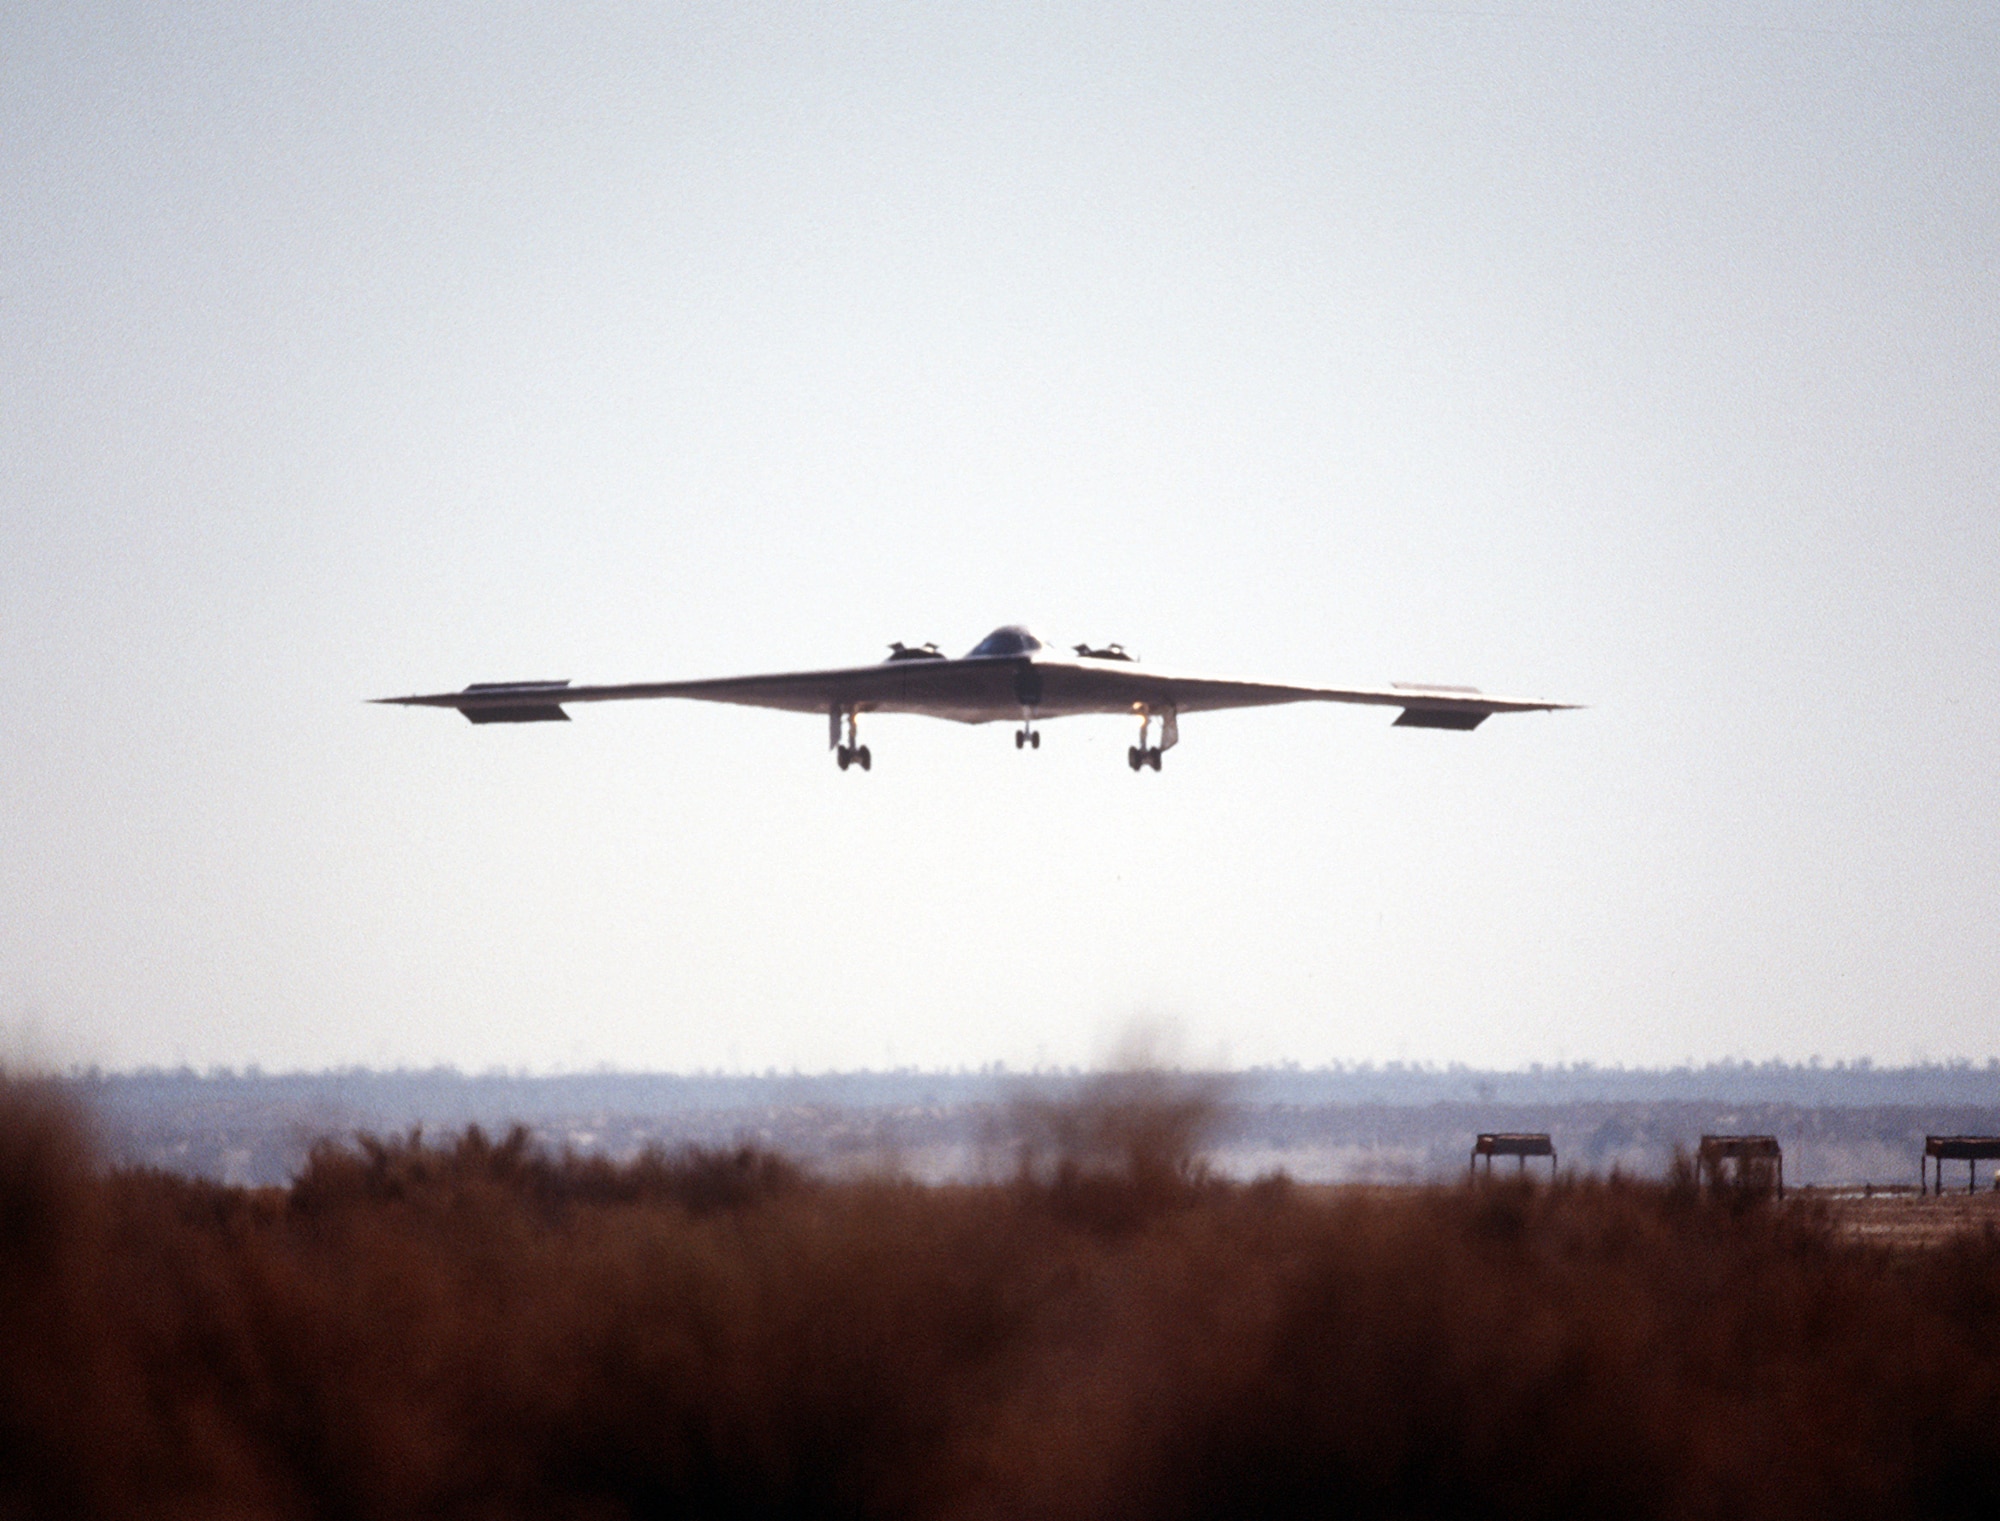 A B-2 Spirit bomber lines up on the runway July 17, 1989, at the Northrop Grumman production facility in Palmdale, Calif. The first flight was just over two hours long, and ended at Edwards Air Force Base, Calif, where the aircraft underwent further testing both on the ground and in the air. (Defense Imagery Management Operations Center)